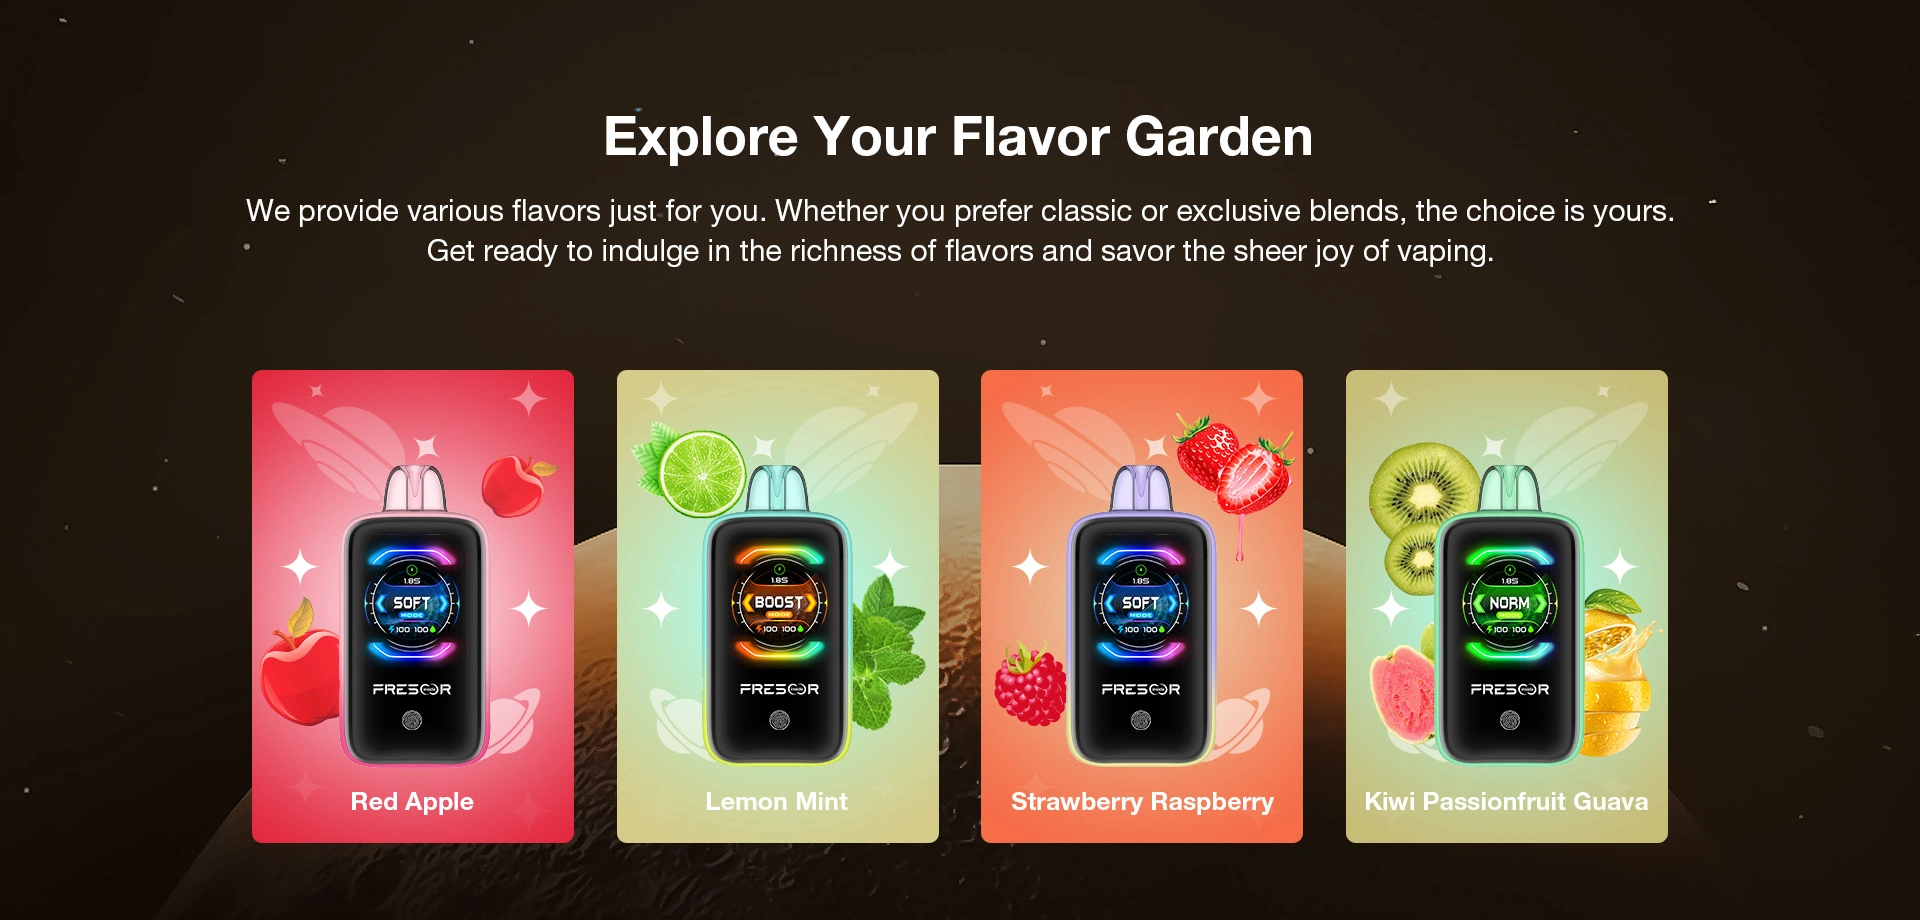 Explore Your Flavor Garden  We provide various flavors just for you. Whether you prefer classic or exclusive blends, the choice is yours. Get ready to indulge in the richness of flavors and savor the sheer joy of vaping.